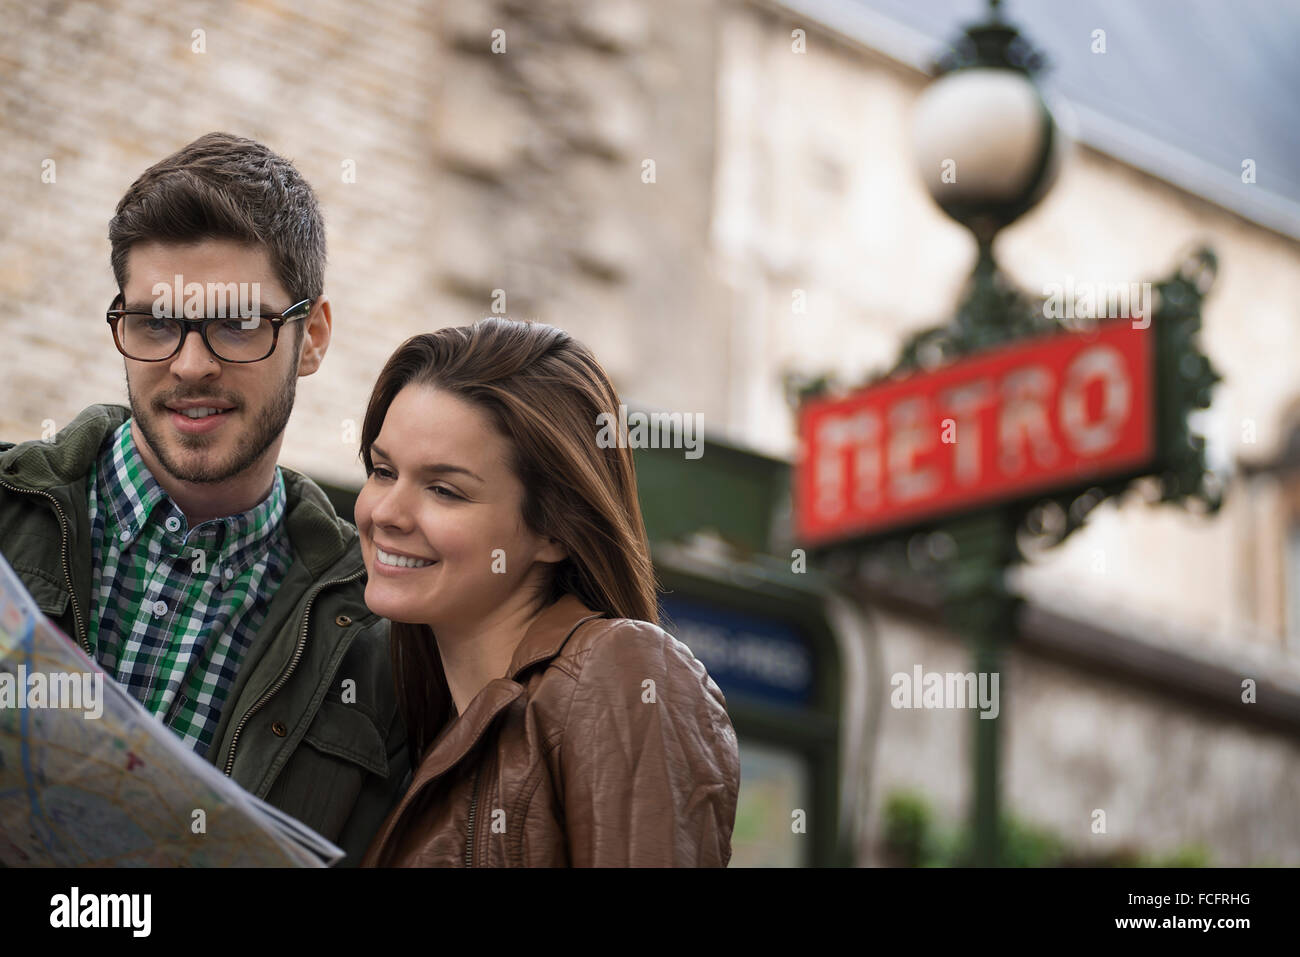 A couple consulting a map on a city street, under a classic Art Deco Metro sign. Stock Photo